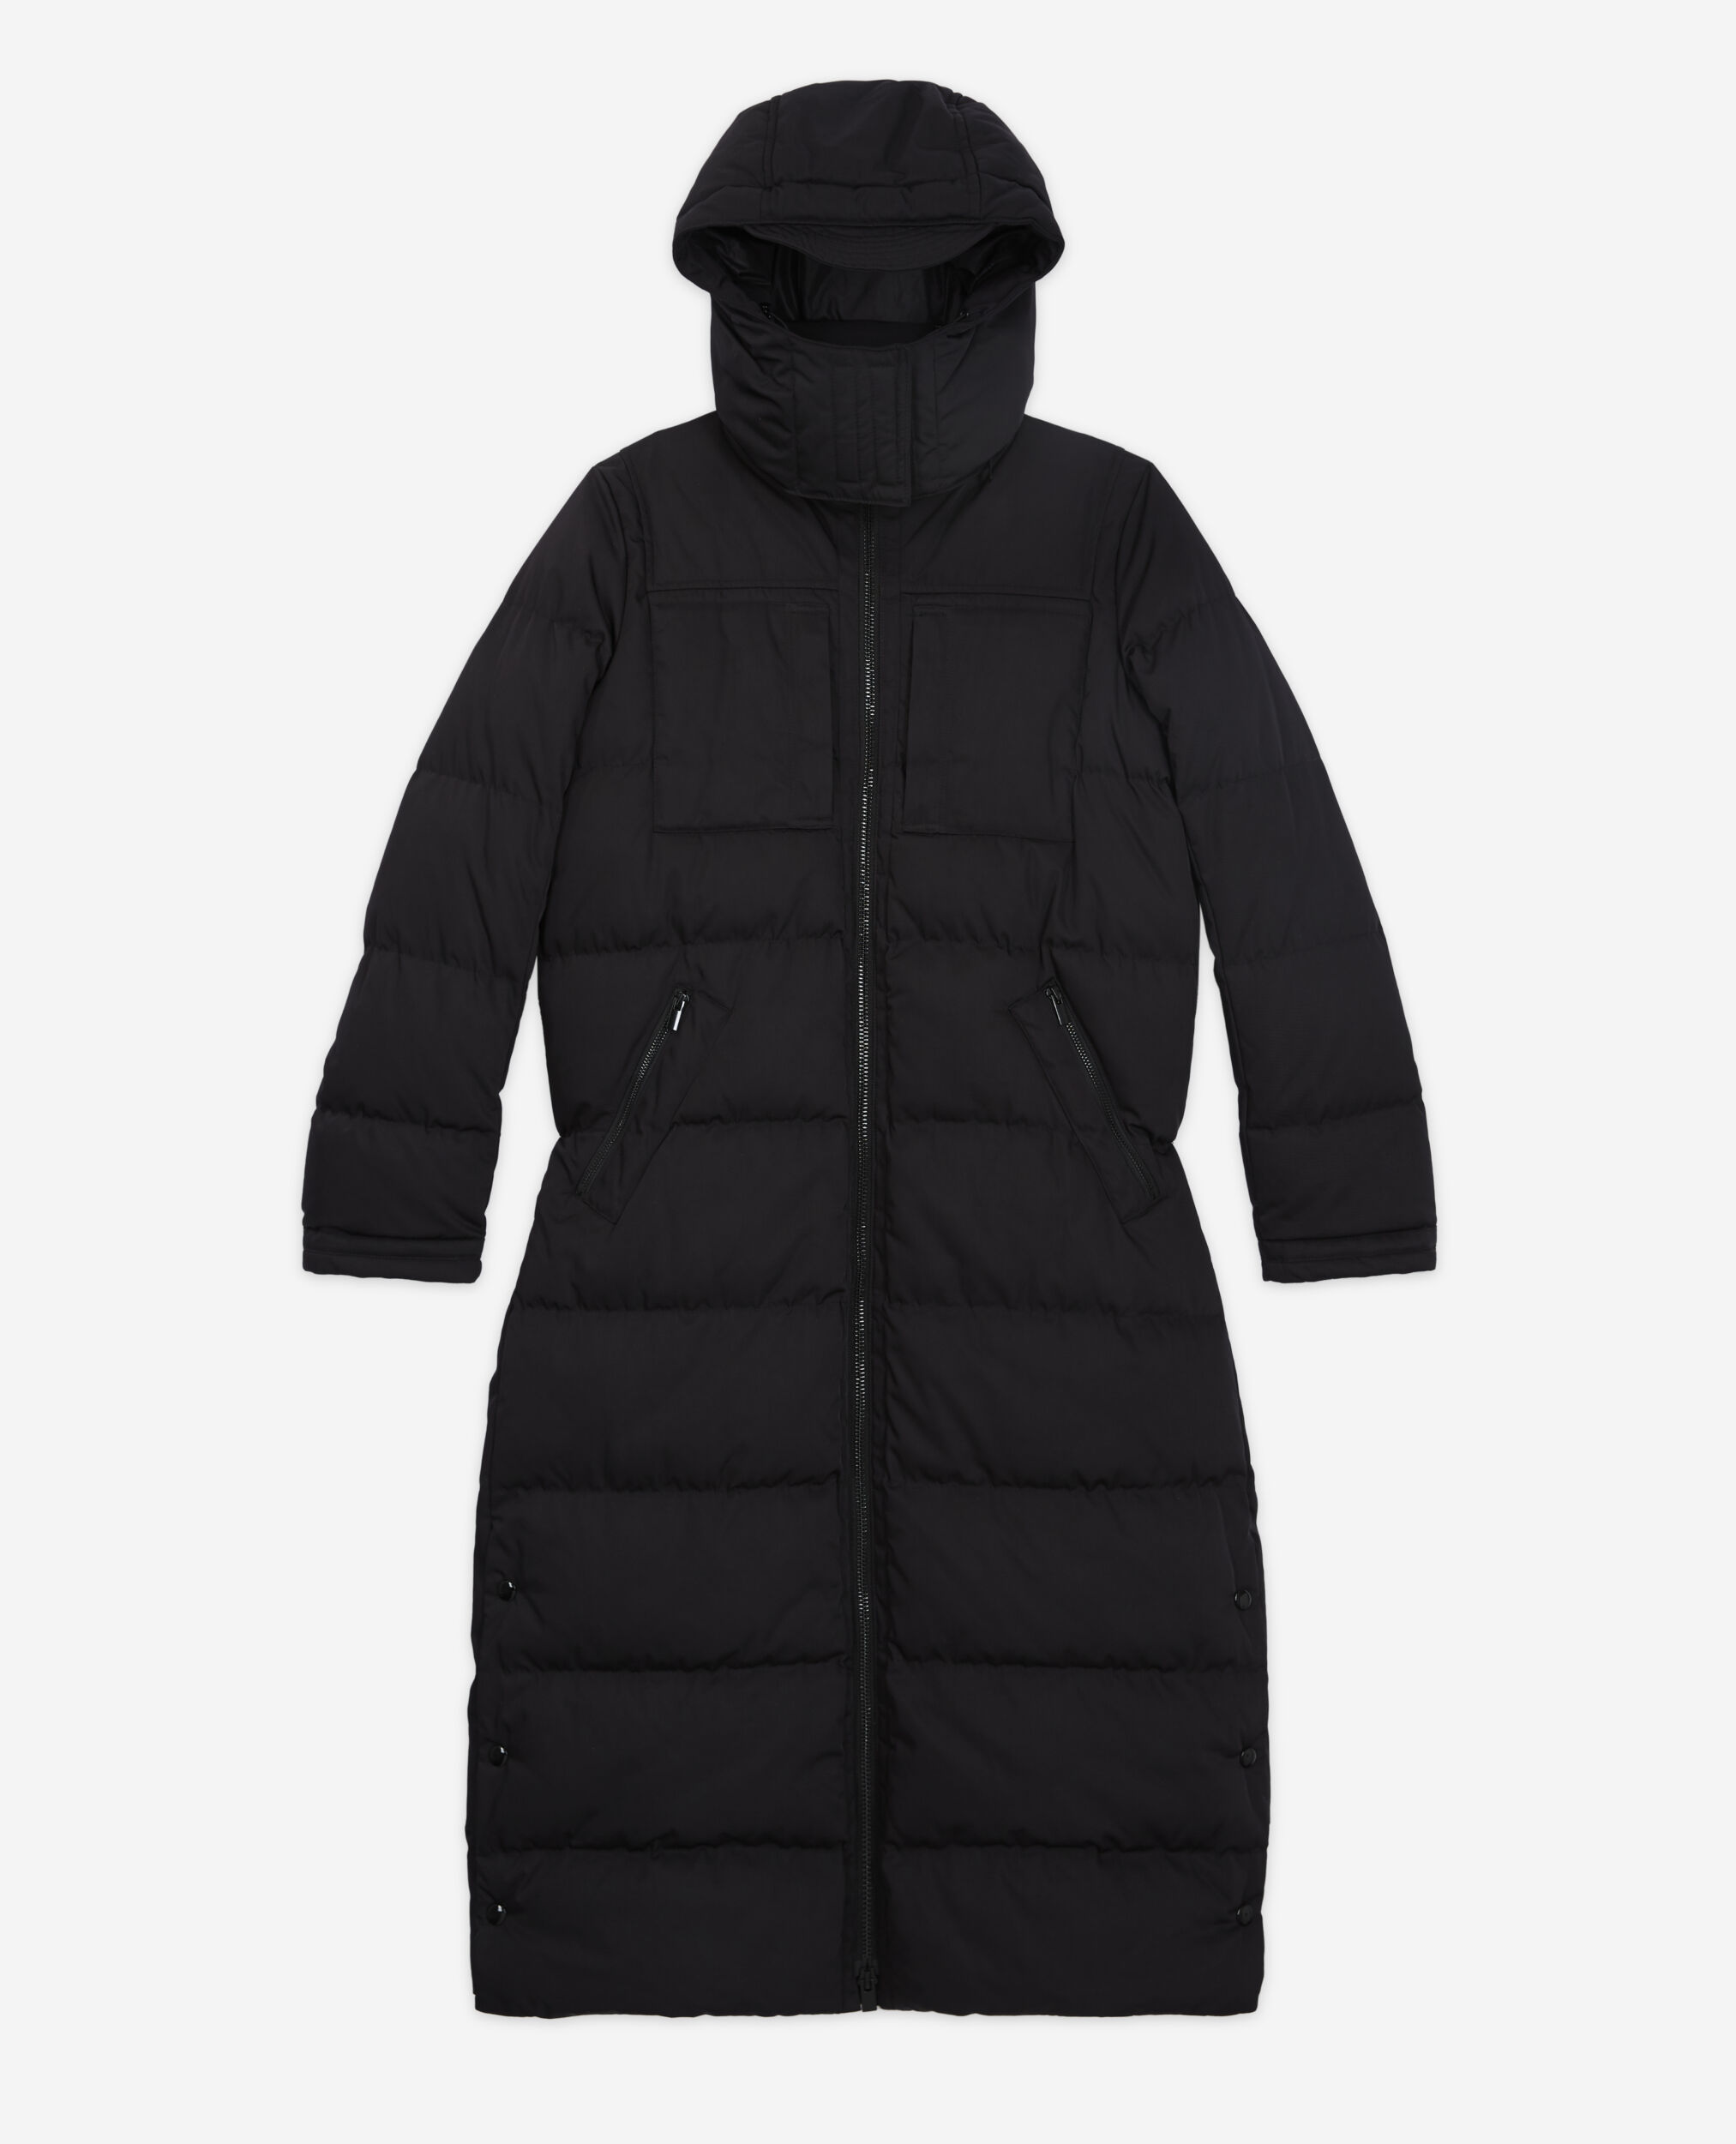 Long black down jacket with straps and logo, BLACK, hi-res image number null